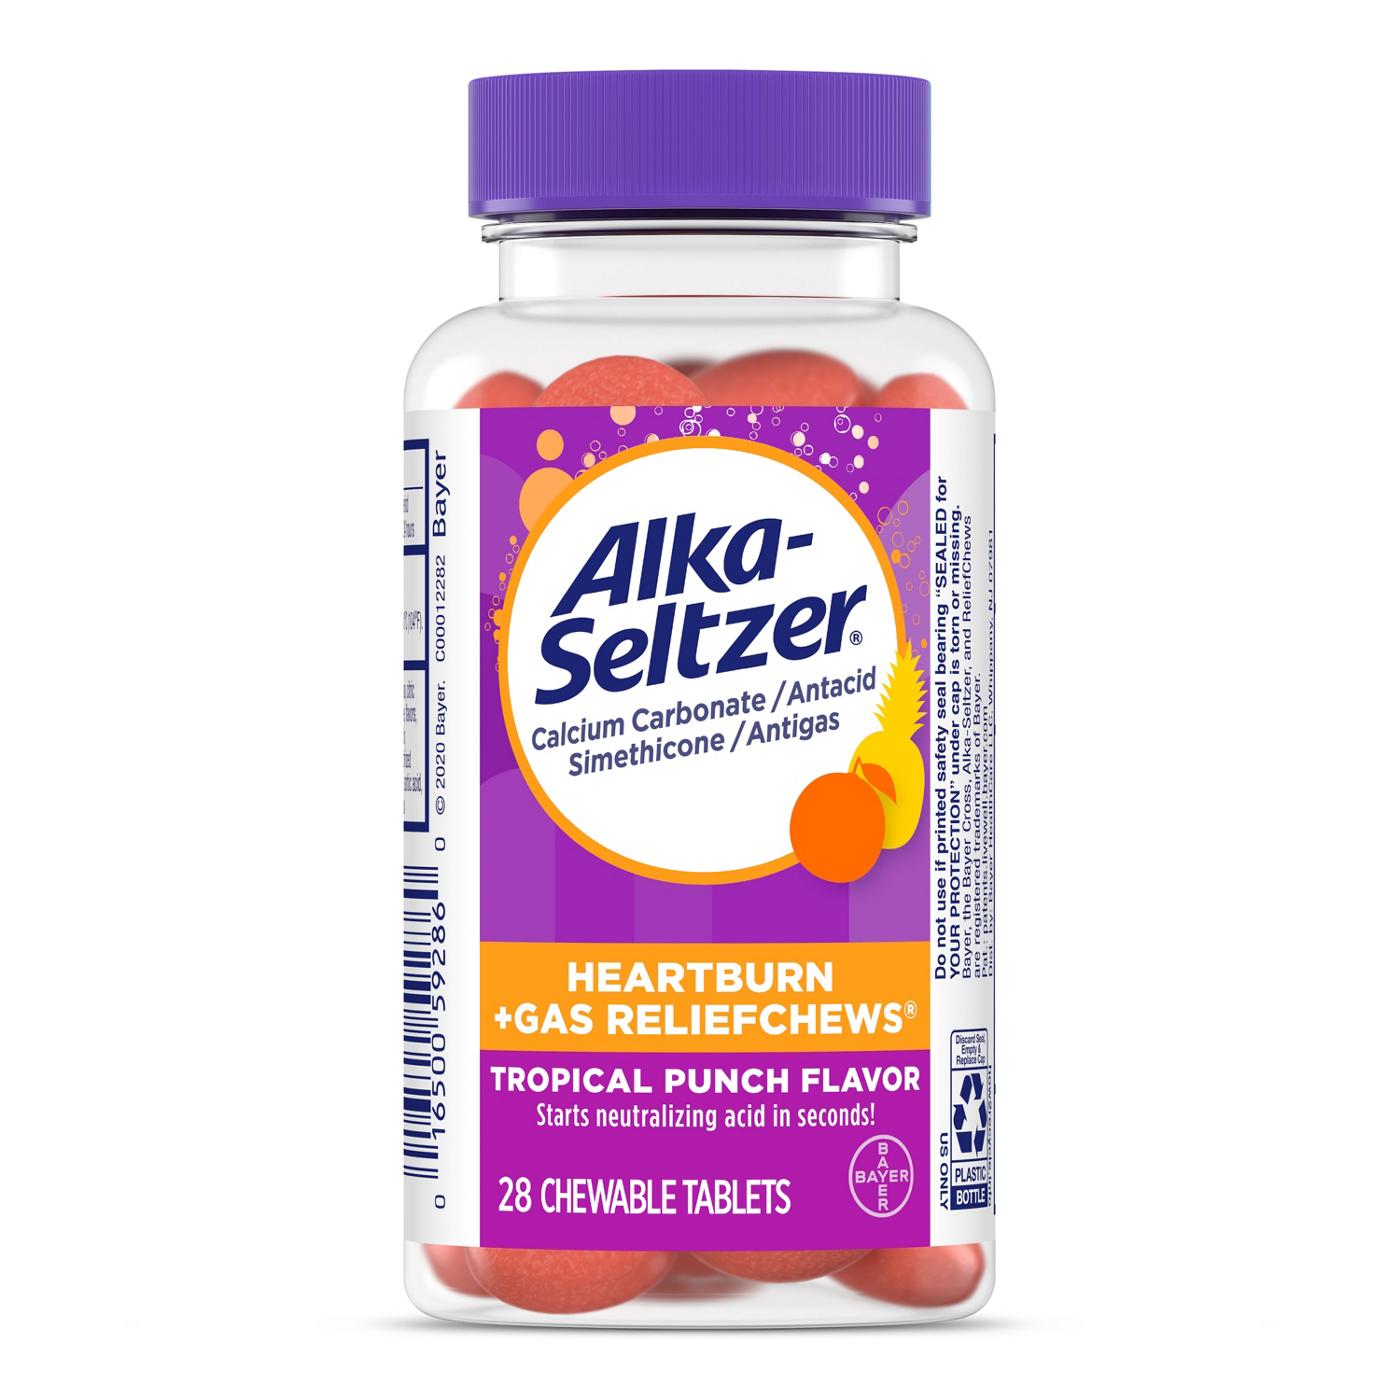 Alka-Seltzer Heartburn + Gas Relief Chews Tropical Punch; image 1 of 4